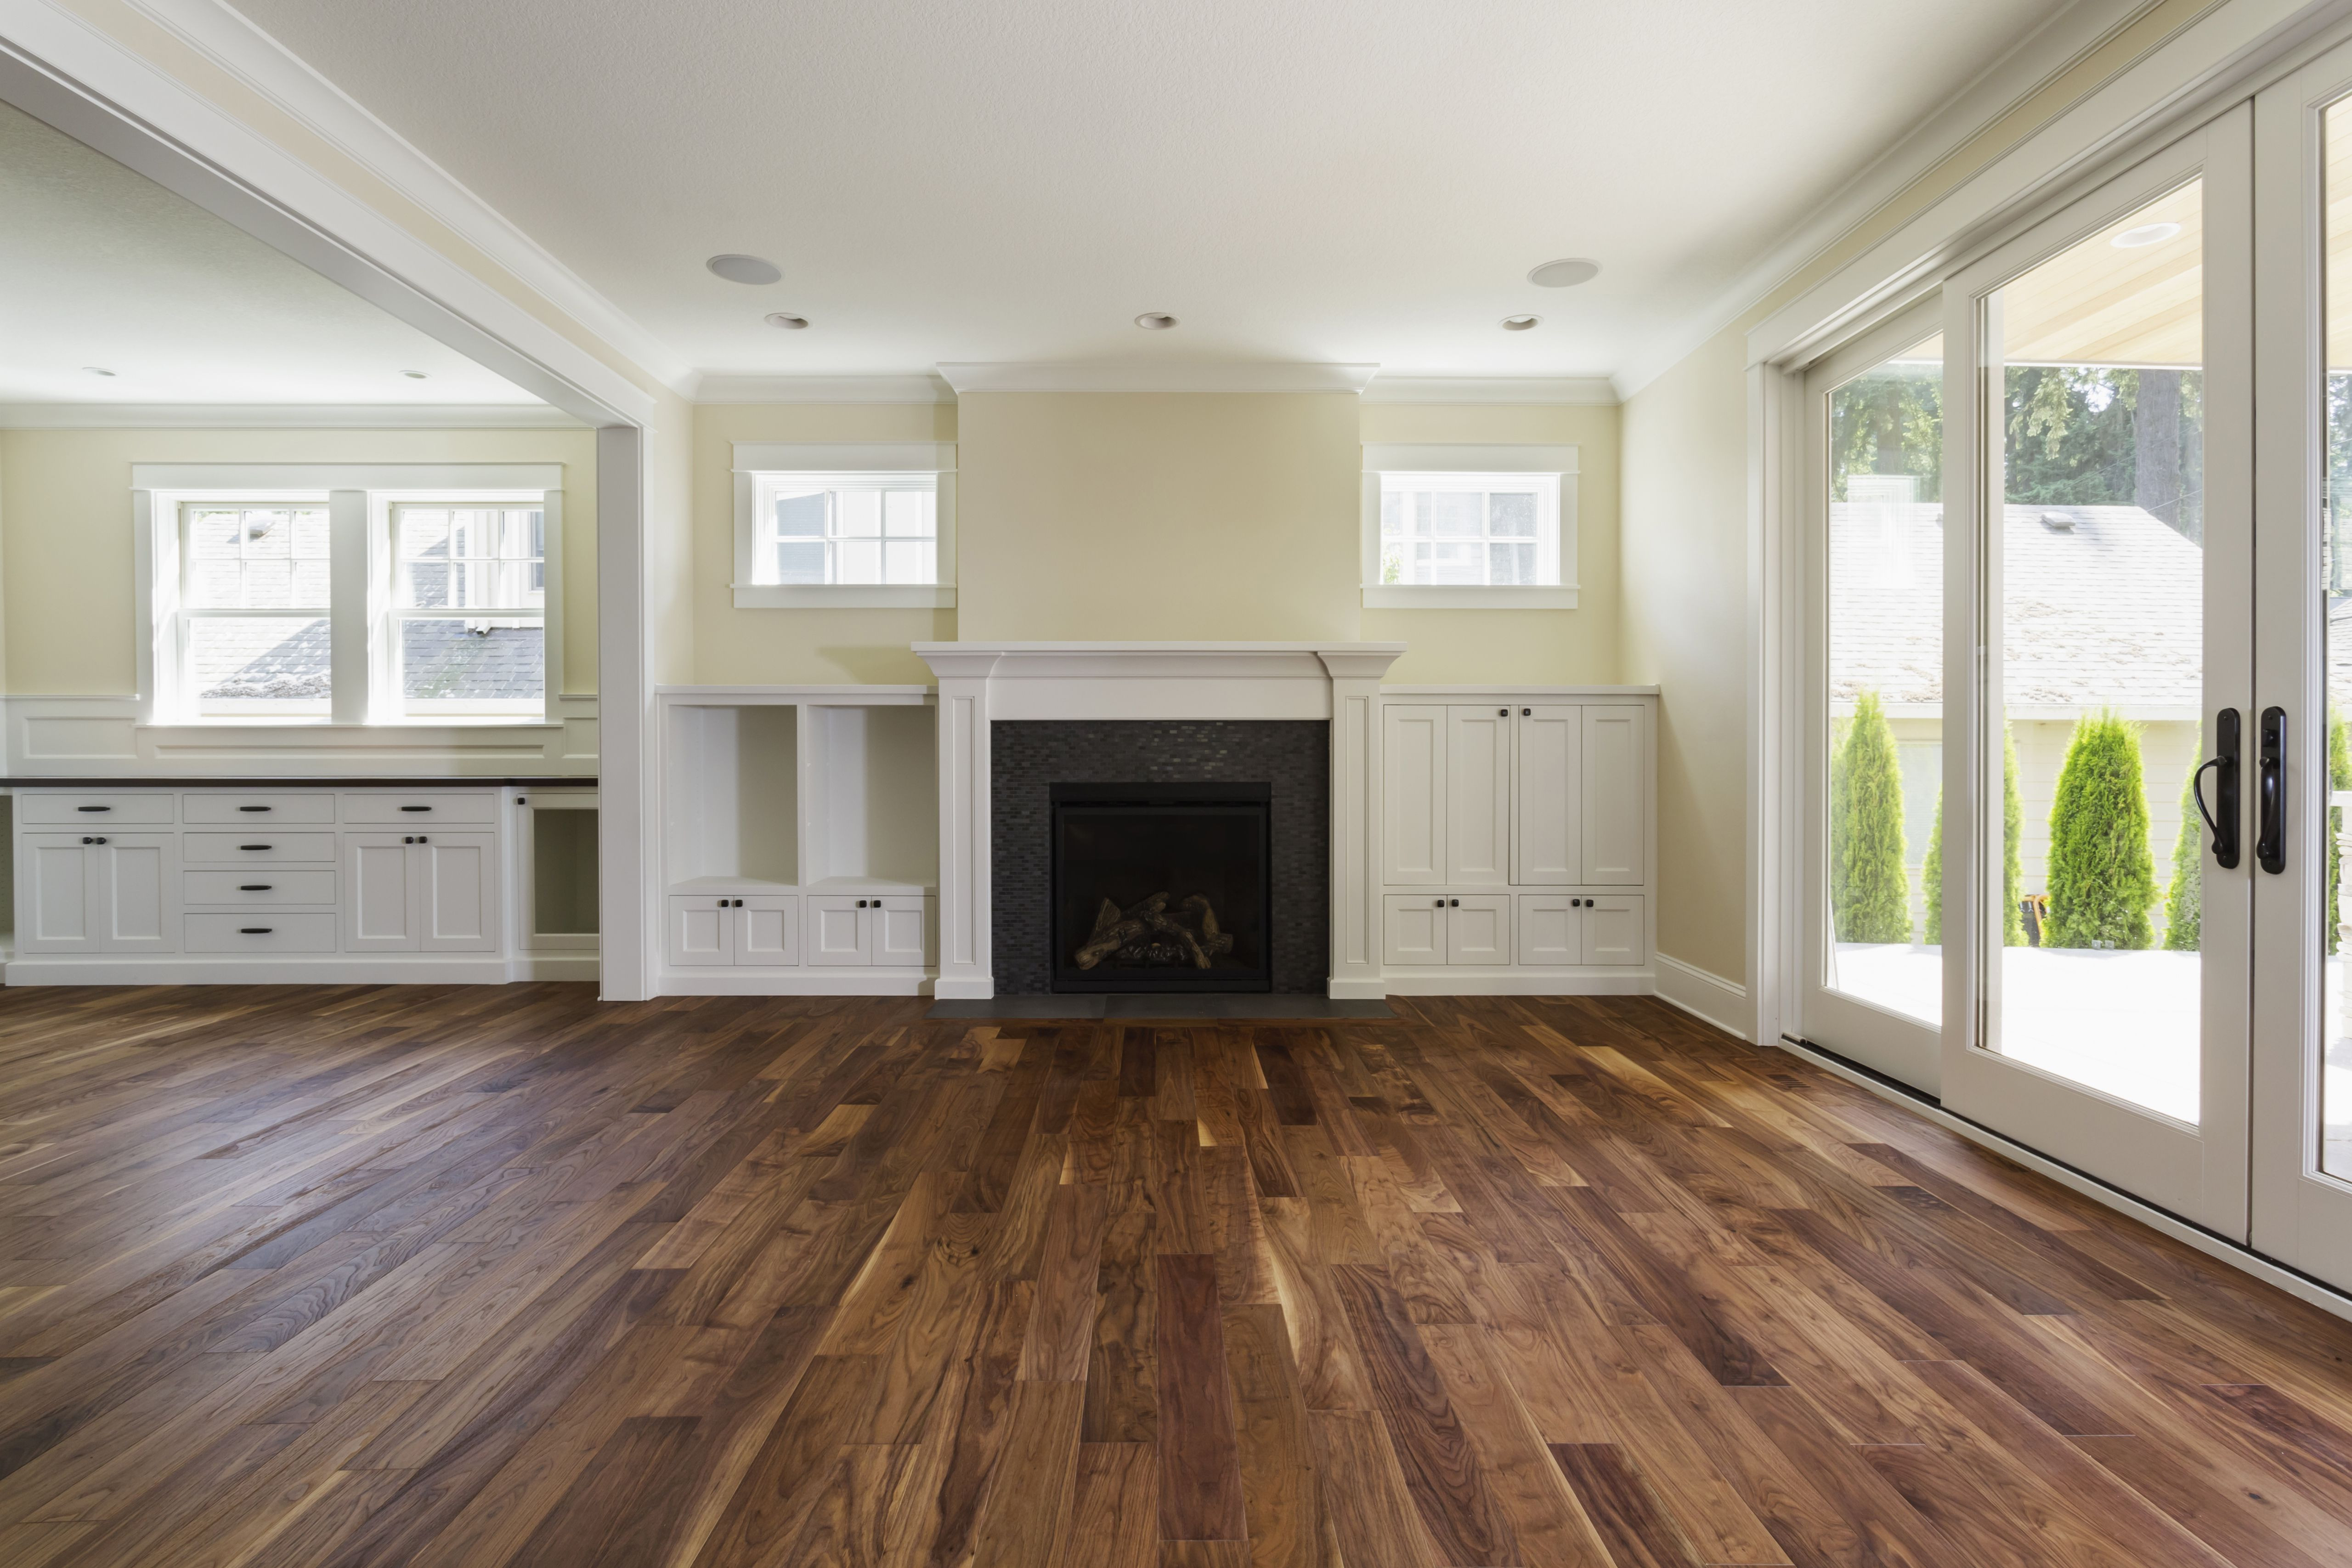 22 Fabulous How Much Does It Cost to Replace Hardwood Floors 2024 free download how much does it cost to replace hardwood floors of the pros and cons of prefinished hardwood flooring intended for fireplace and built in shelves in living room 482143011 57bef8e33df78cc16e